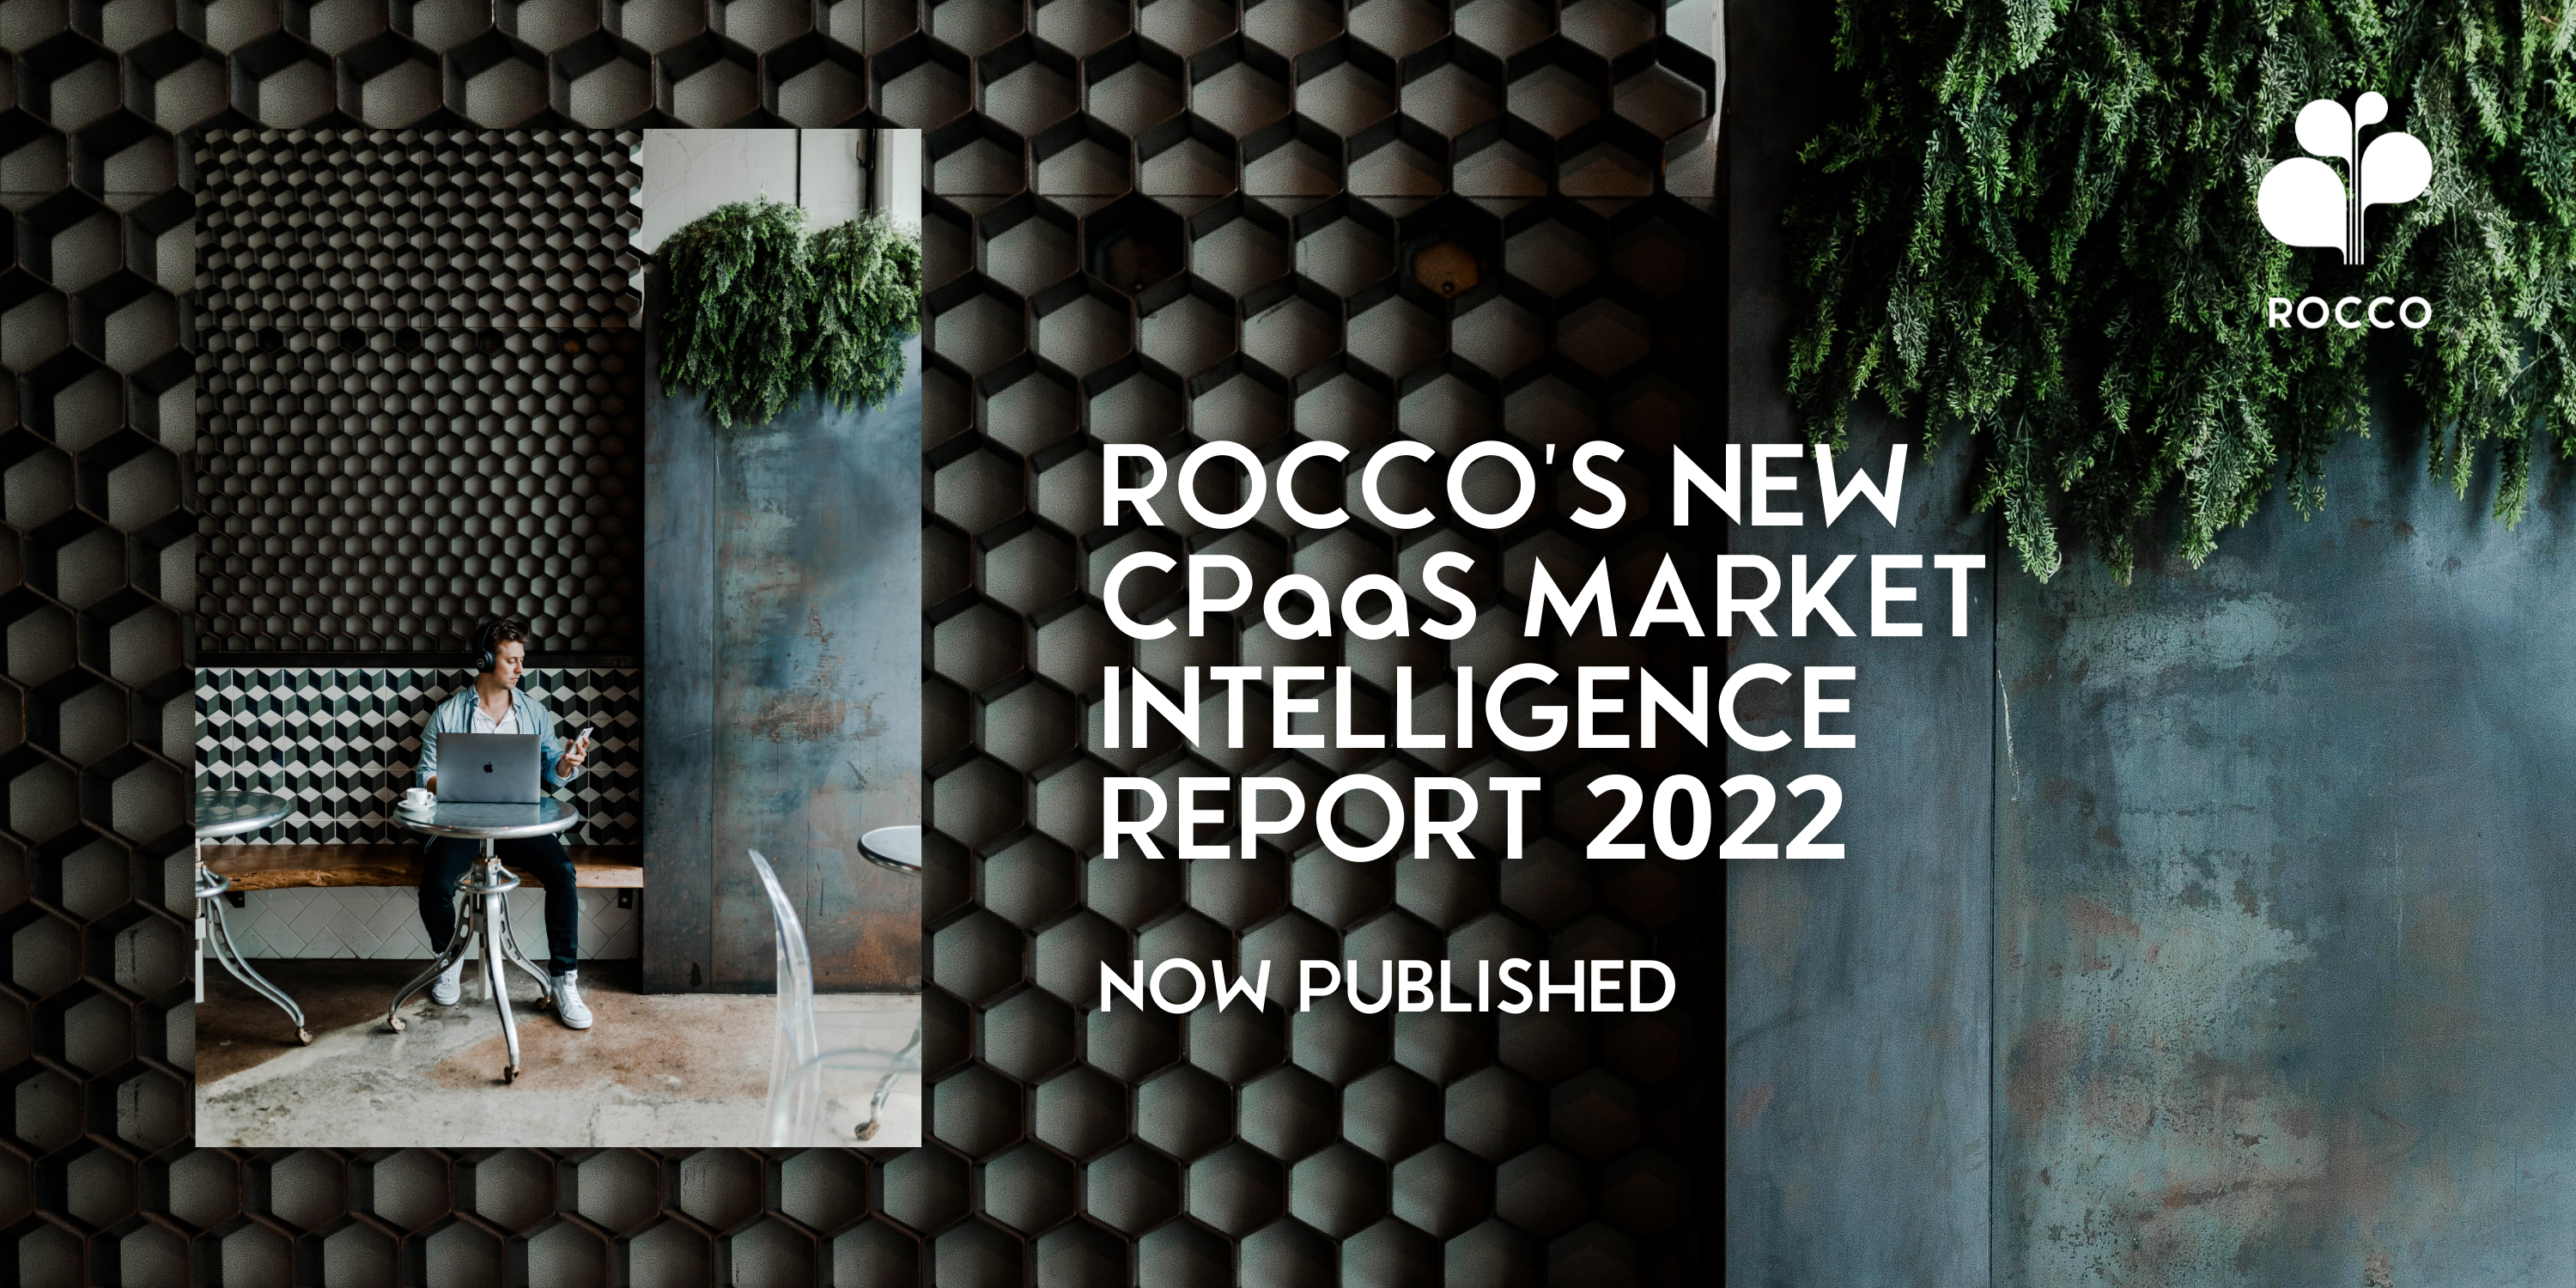 ROCCO PRODUCES NEW CPaaS REPORT for 2022